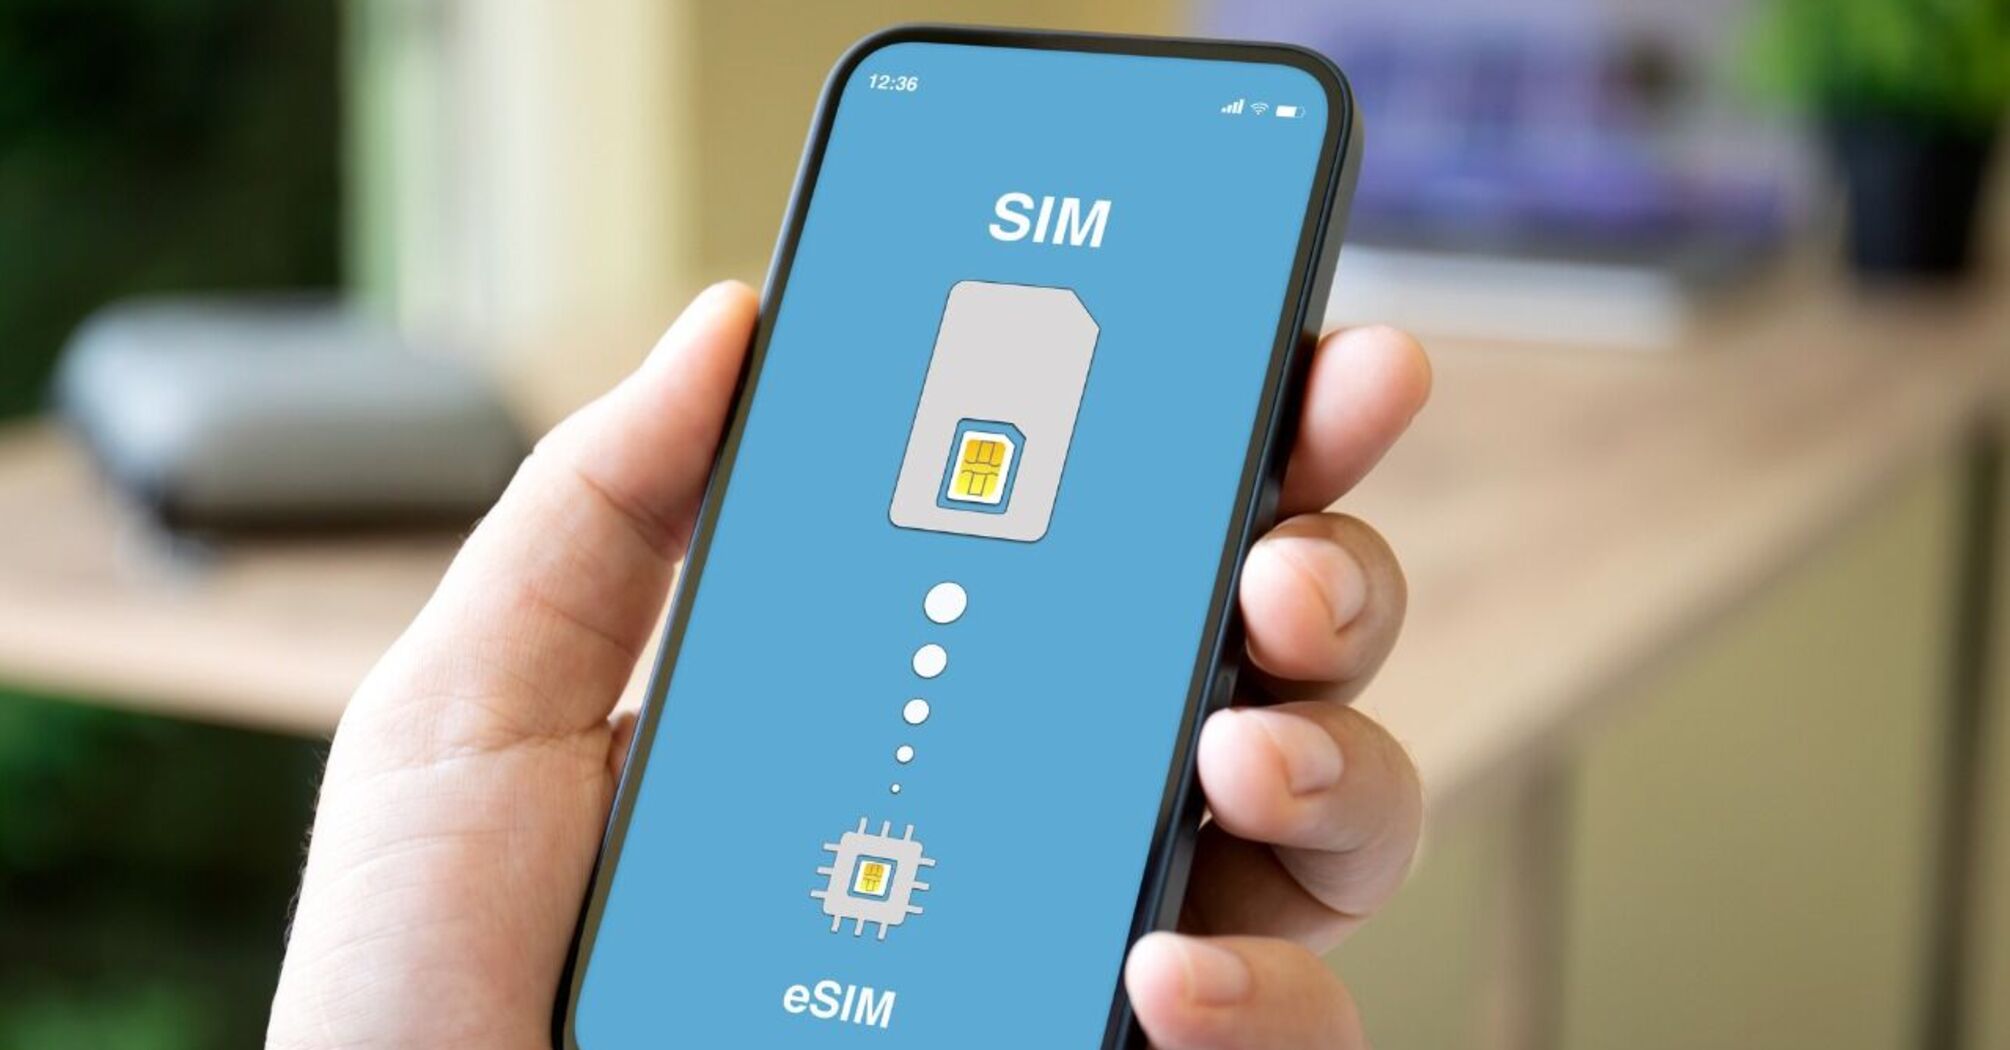 What is an eSIM and how to transfer it to a new iPhone